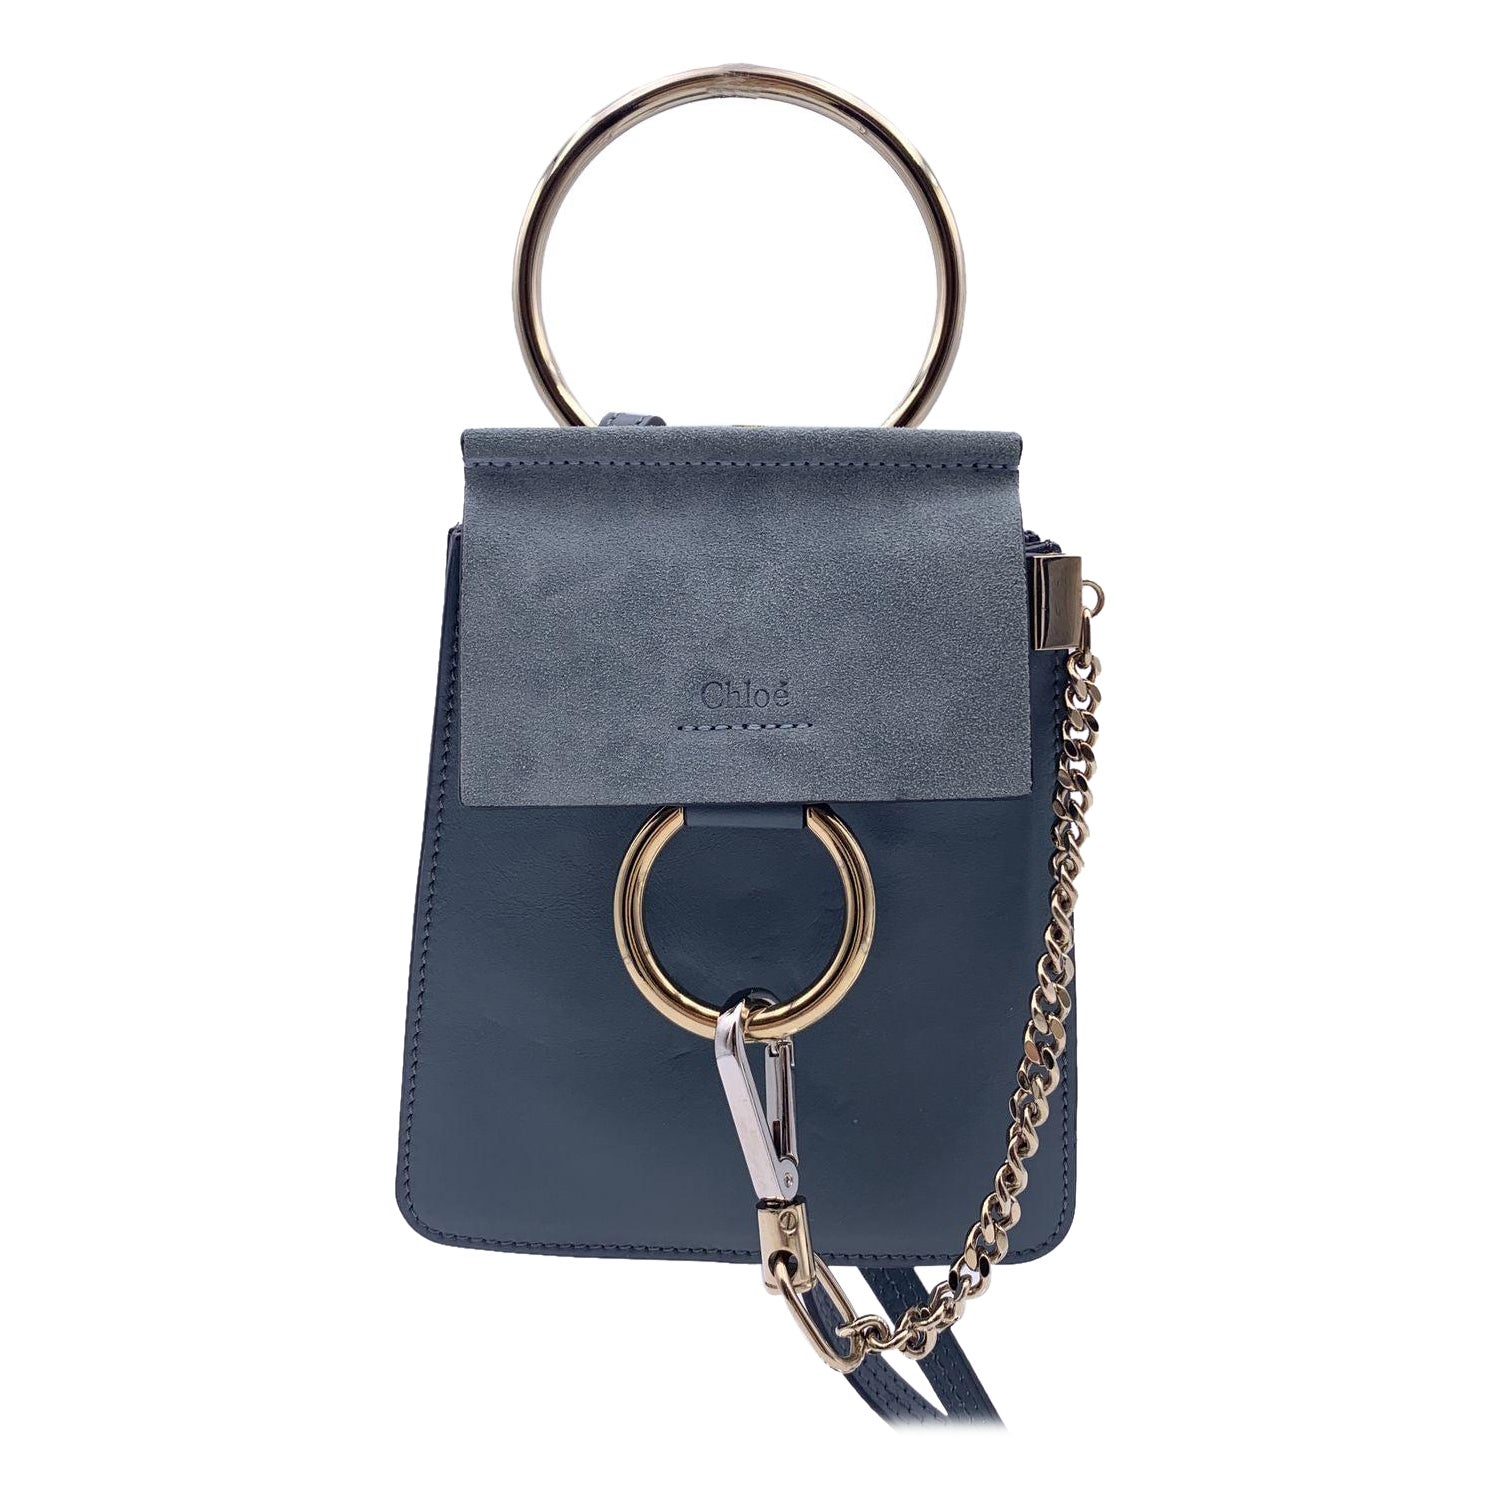 Chloe Light Blue Suede and Leather Mini Faye Shoulder Bag For Sale